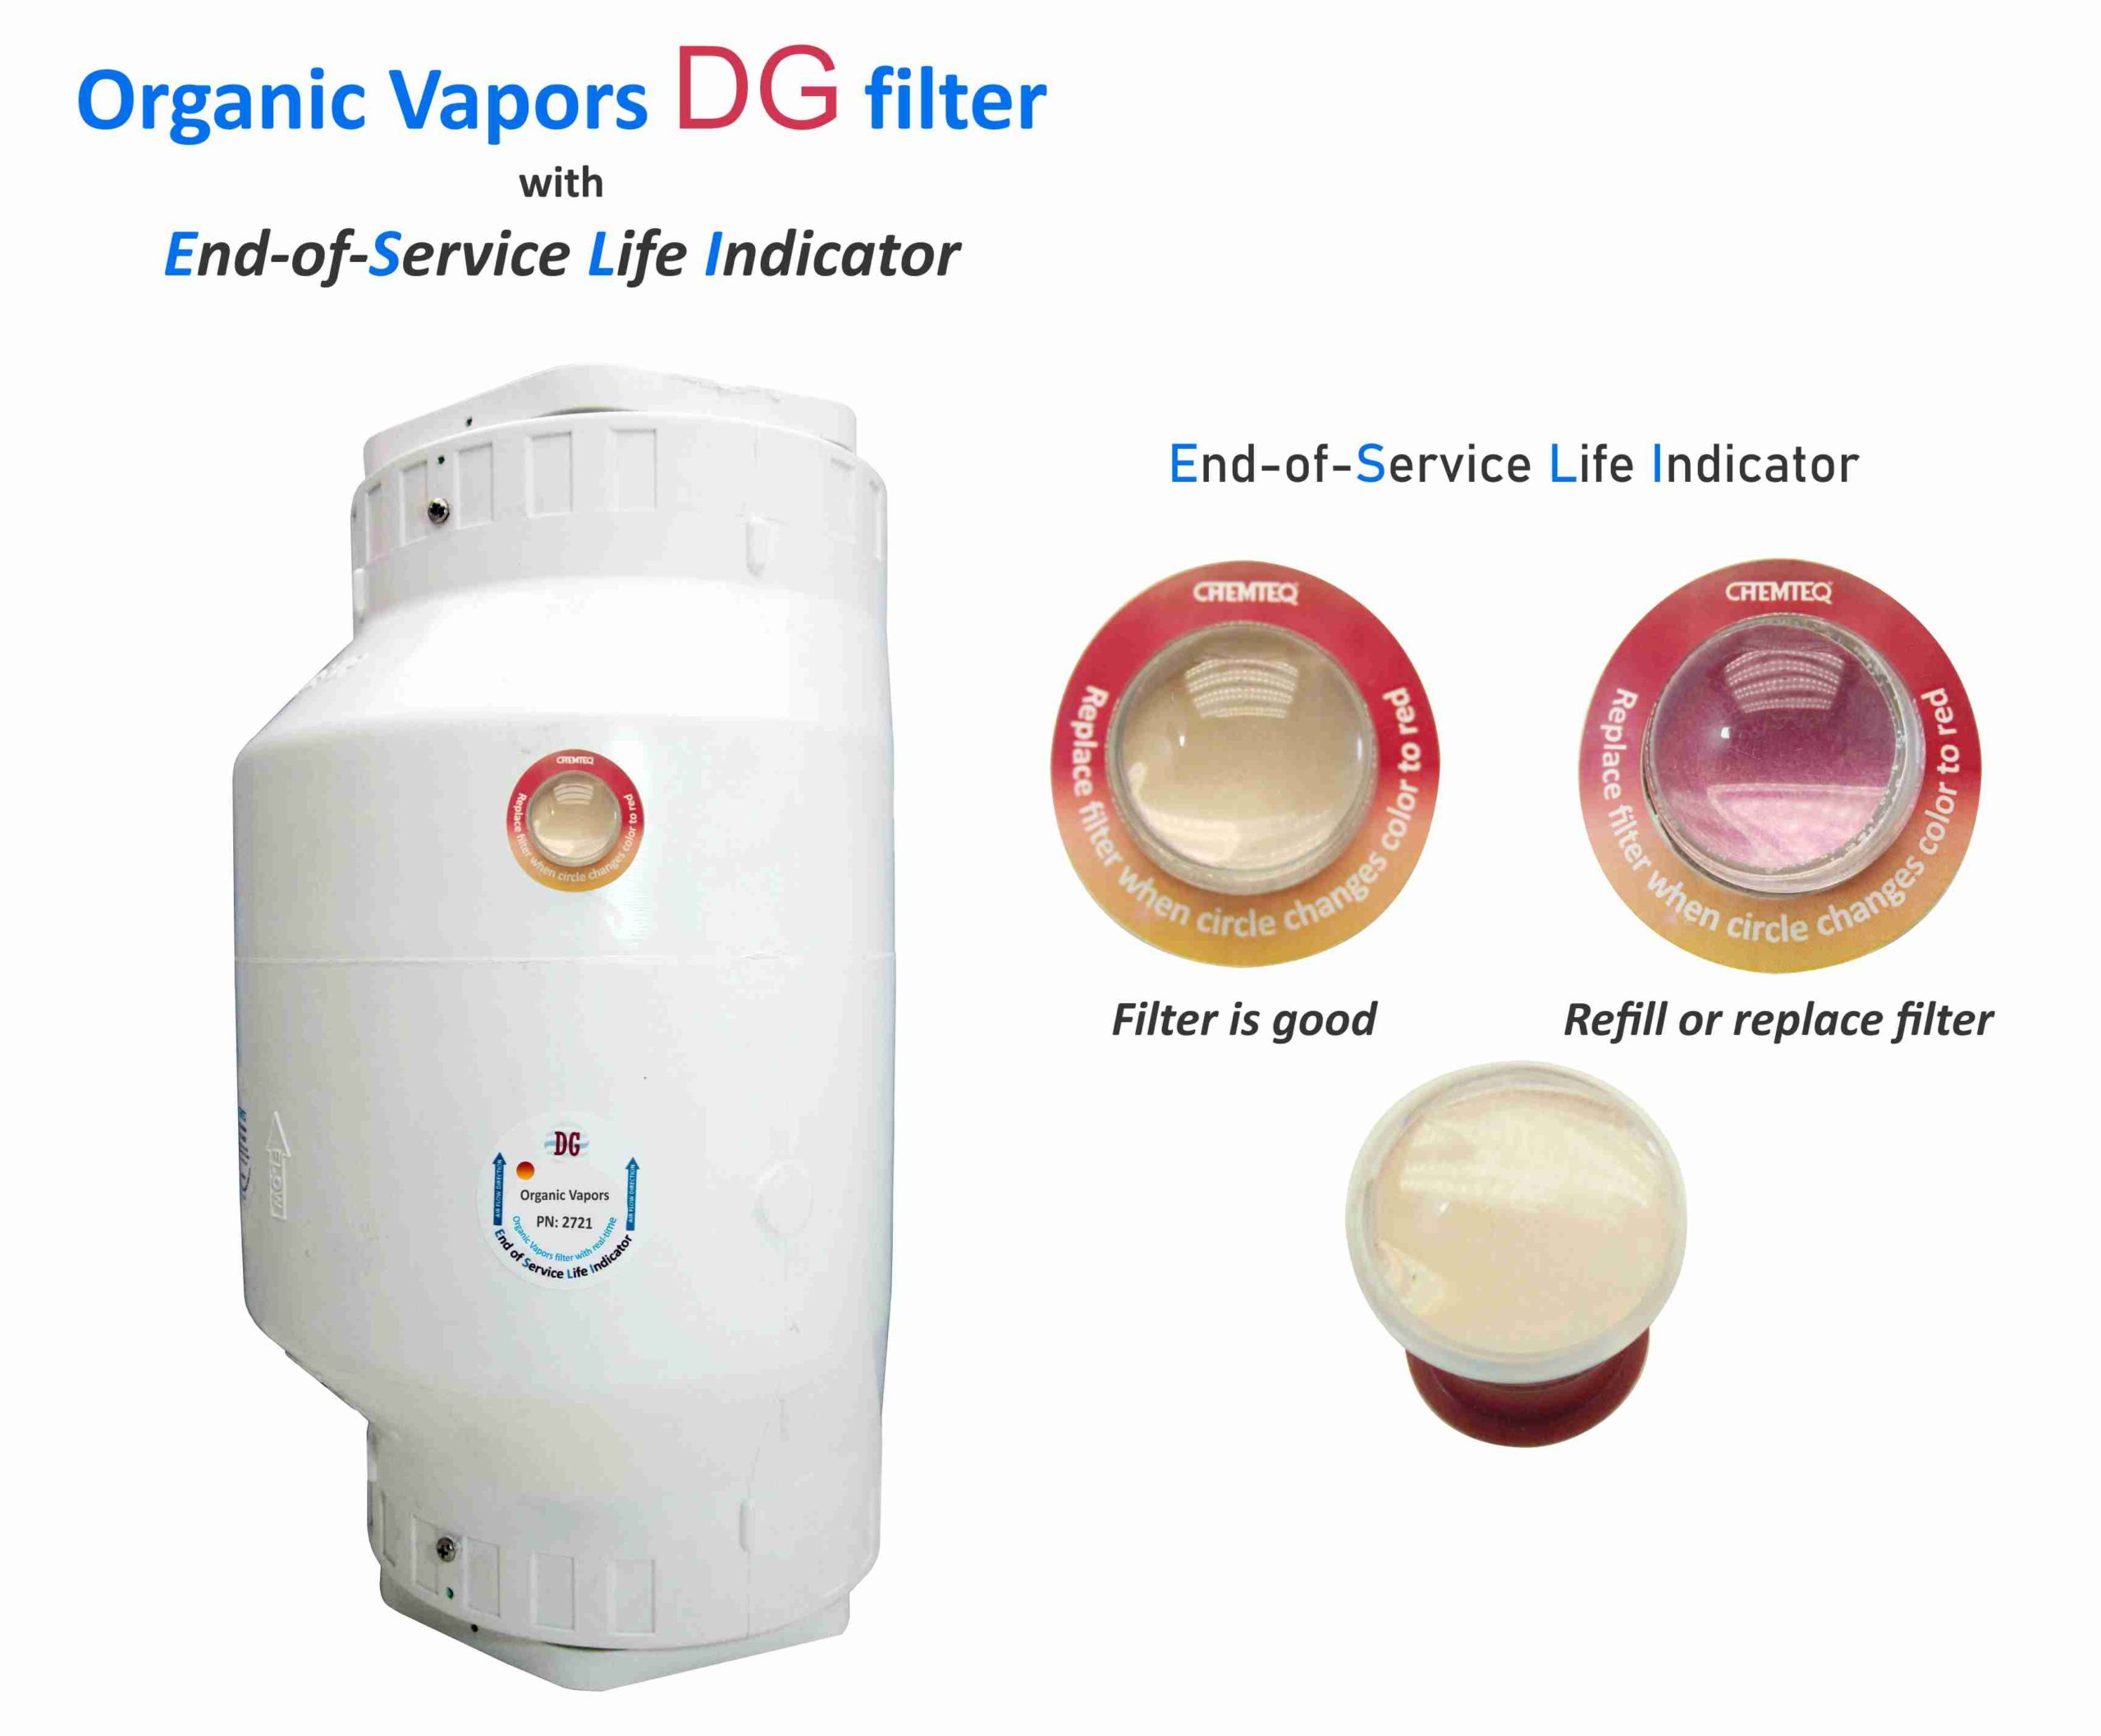 Organic Vapors DG FILTER-ESLI-2721. Filter with end of service life indicator. Suitable for chemical processes and reactor vents